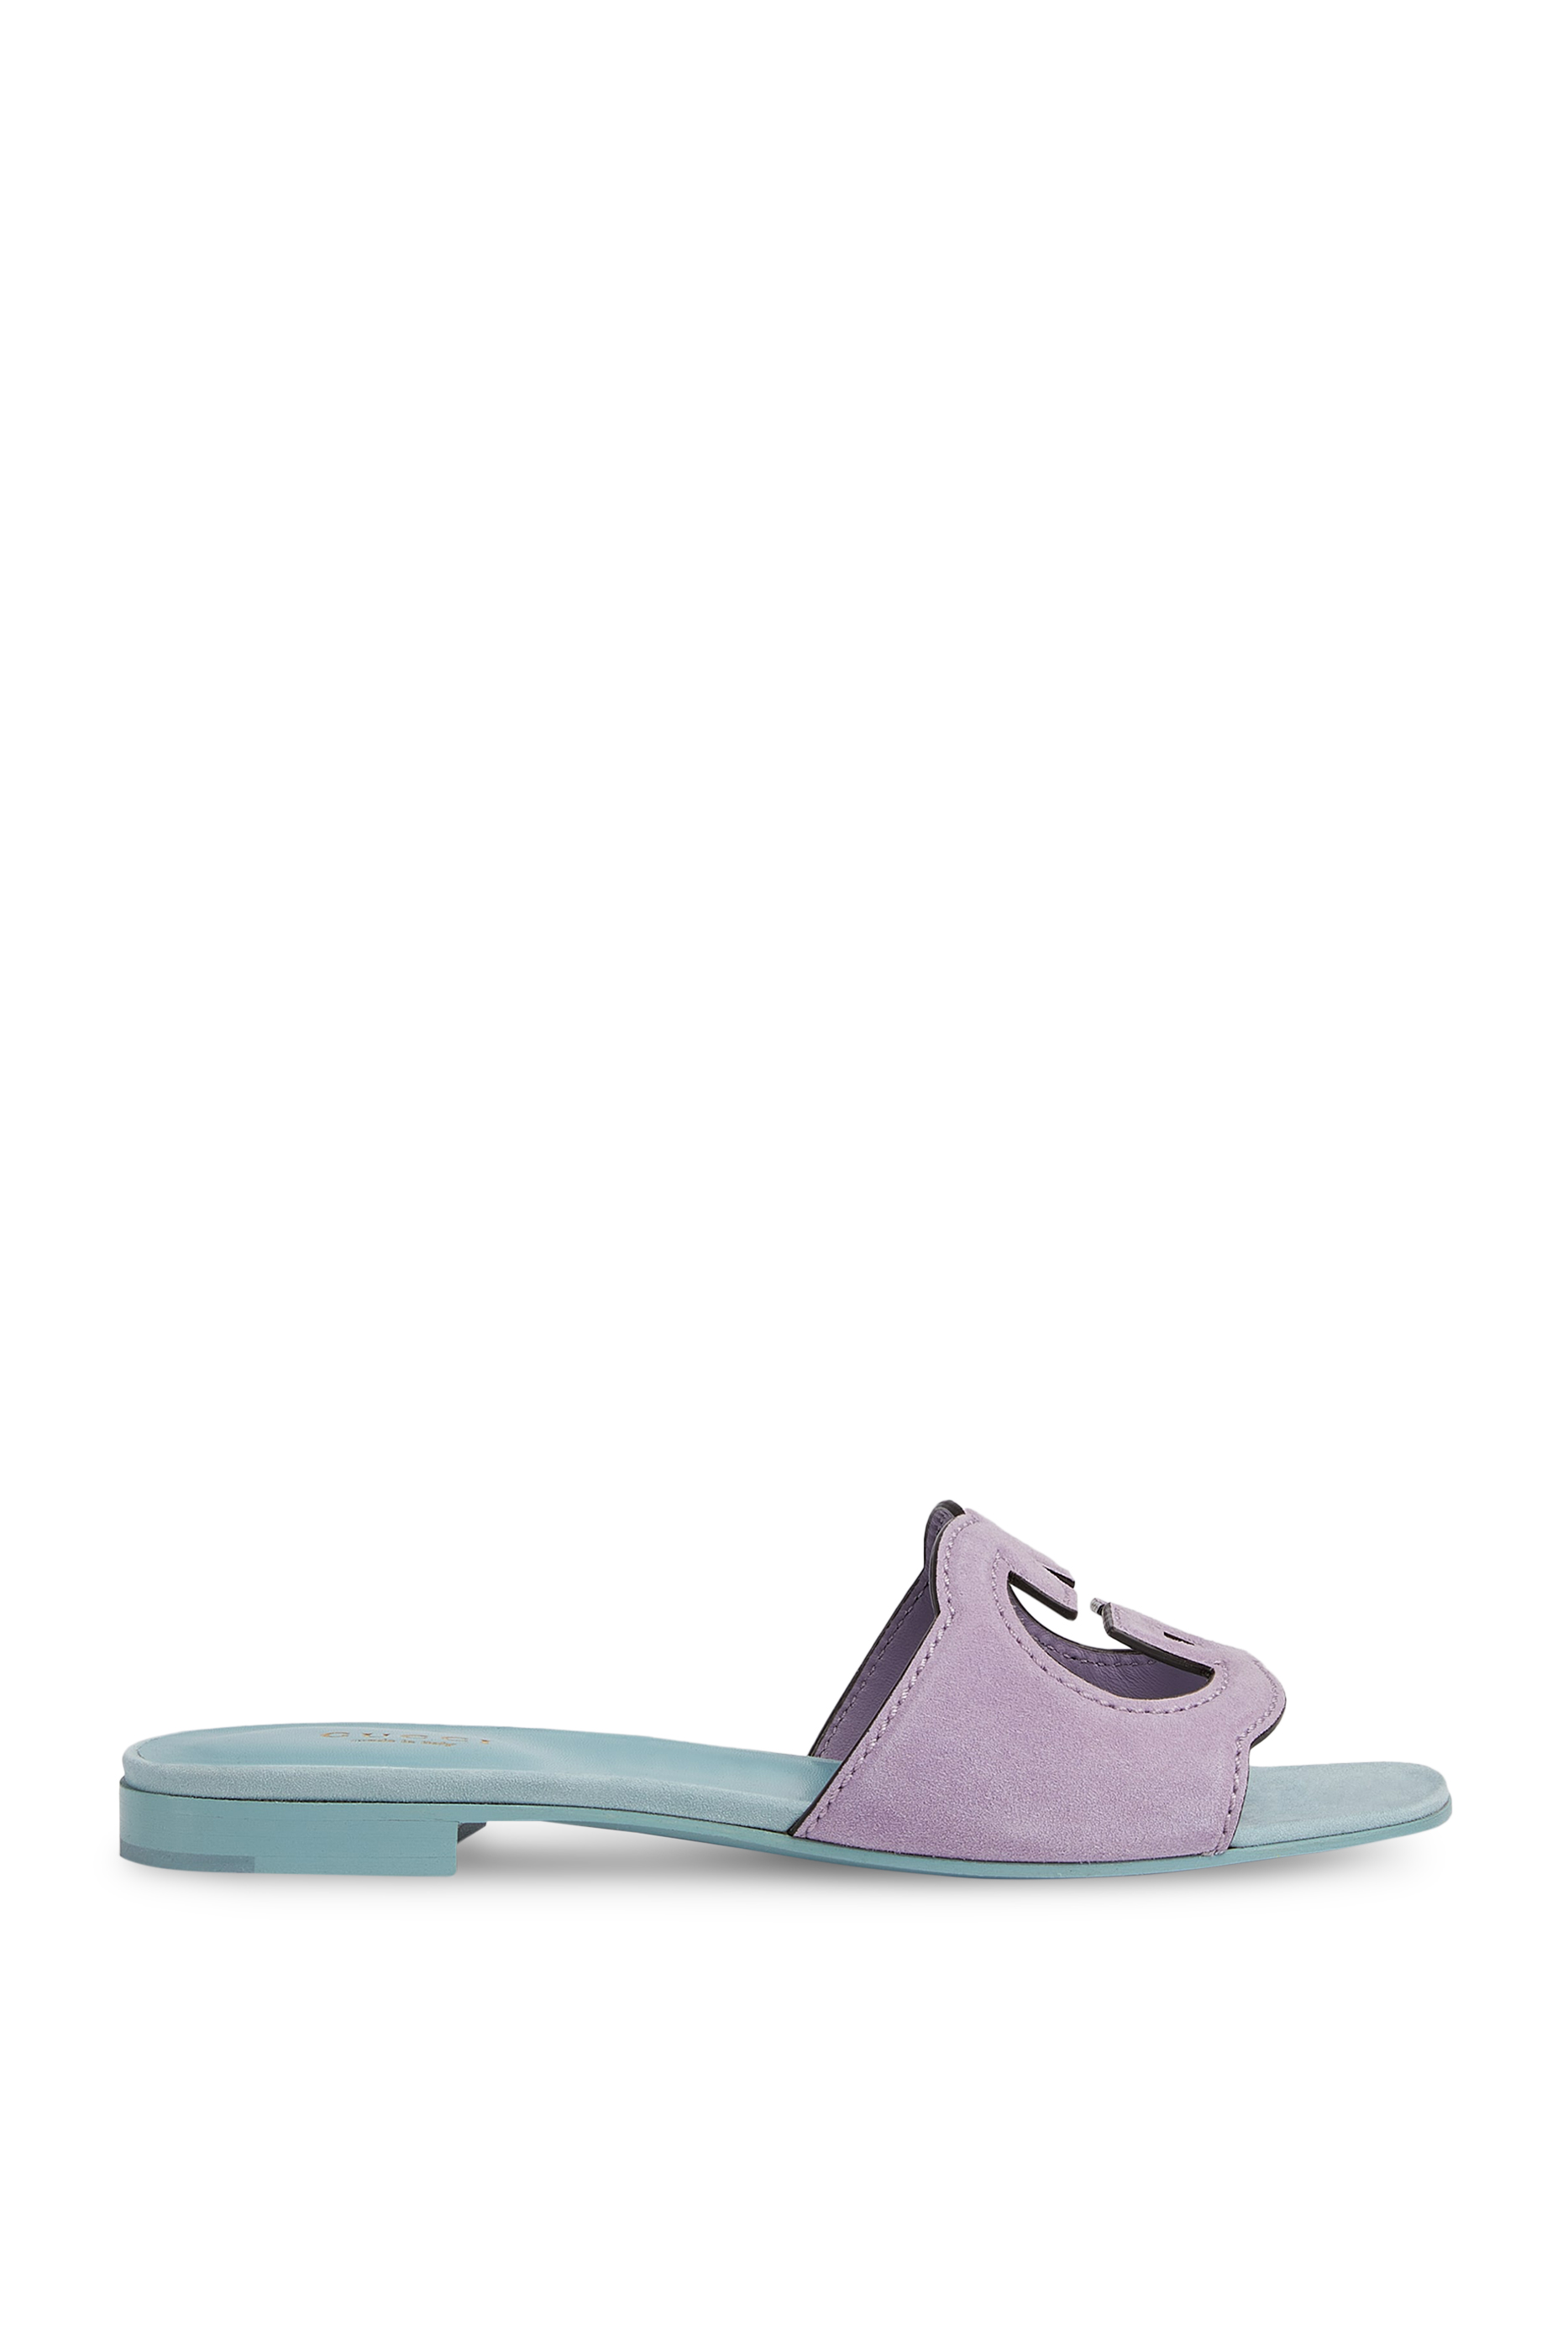 Buy Gucci Interlocking G Cut-Out Sandals for Womens | Bloomingdale's UAE